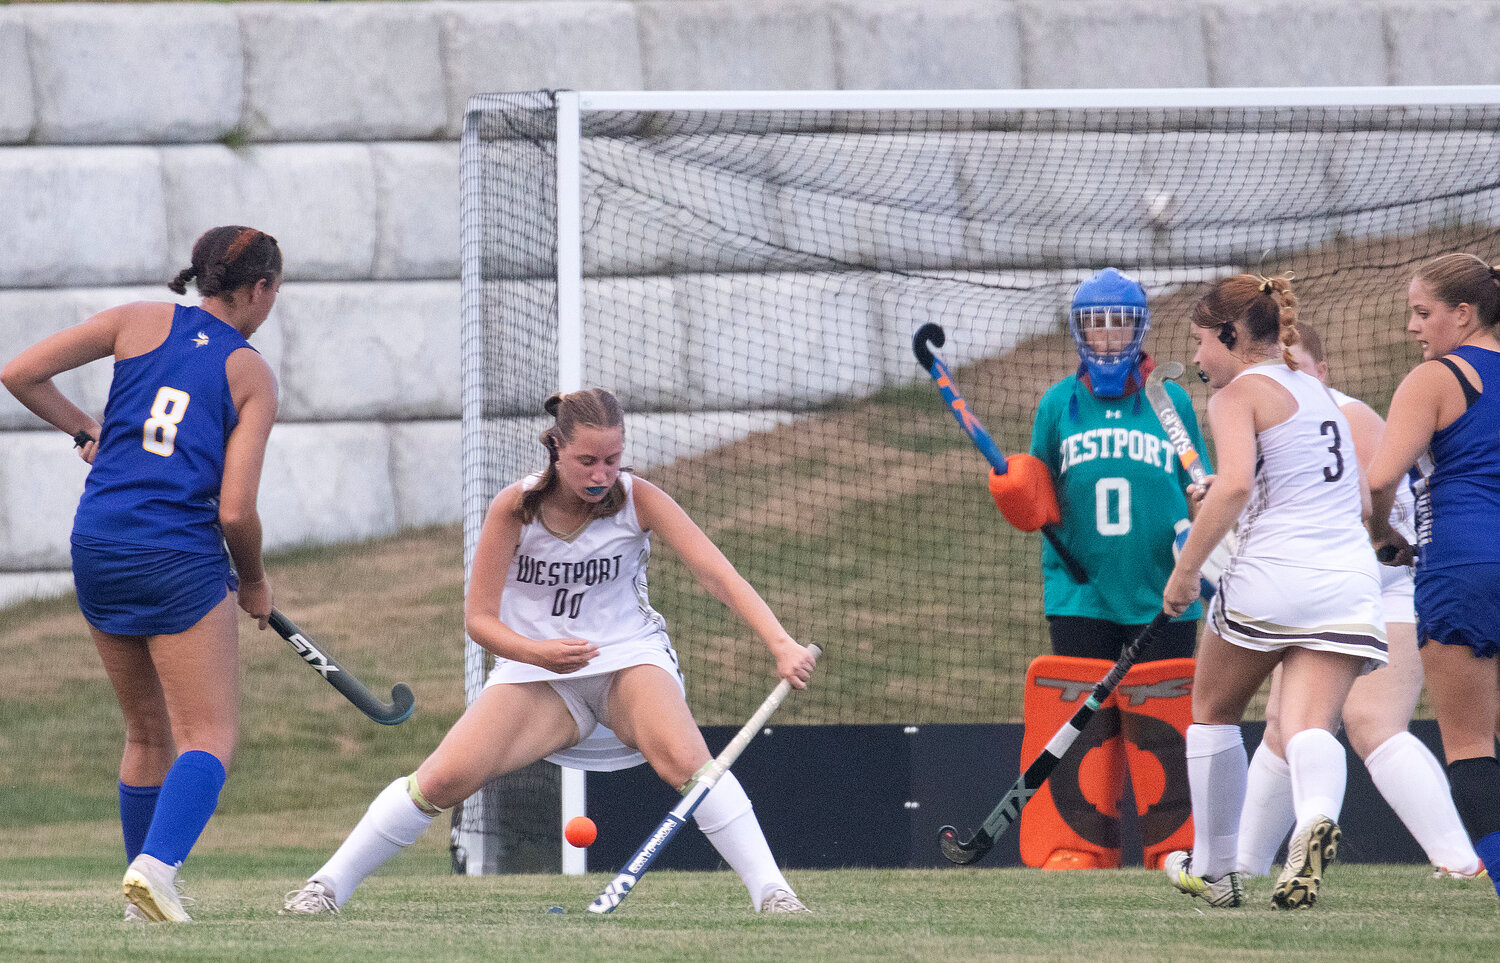 Colleen Smith (left) makes a save ahead of goalkeeper Hannah Abrams (right).